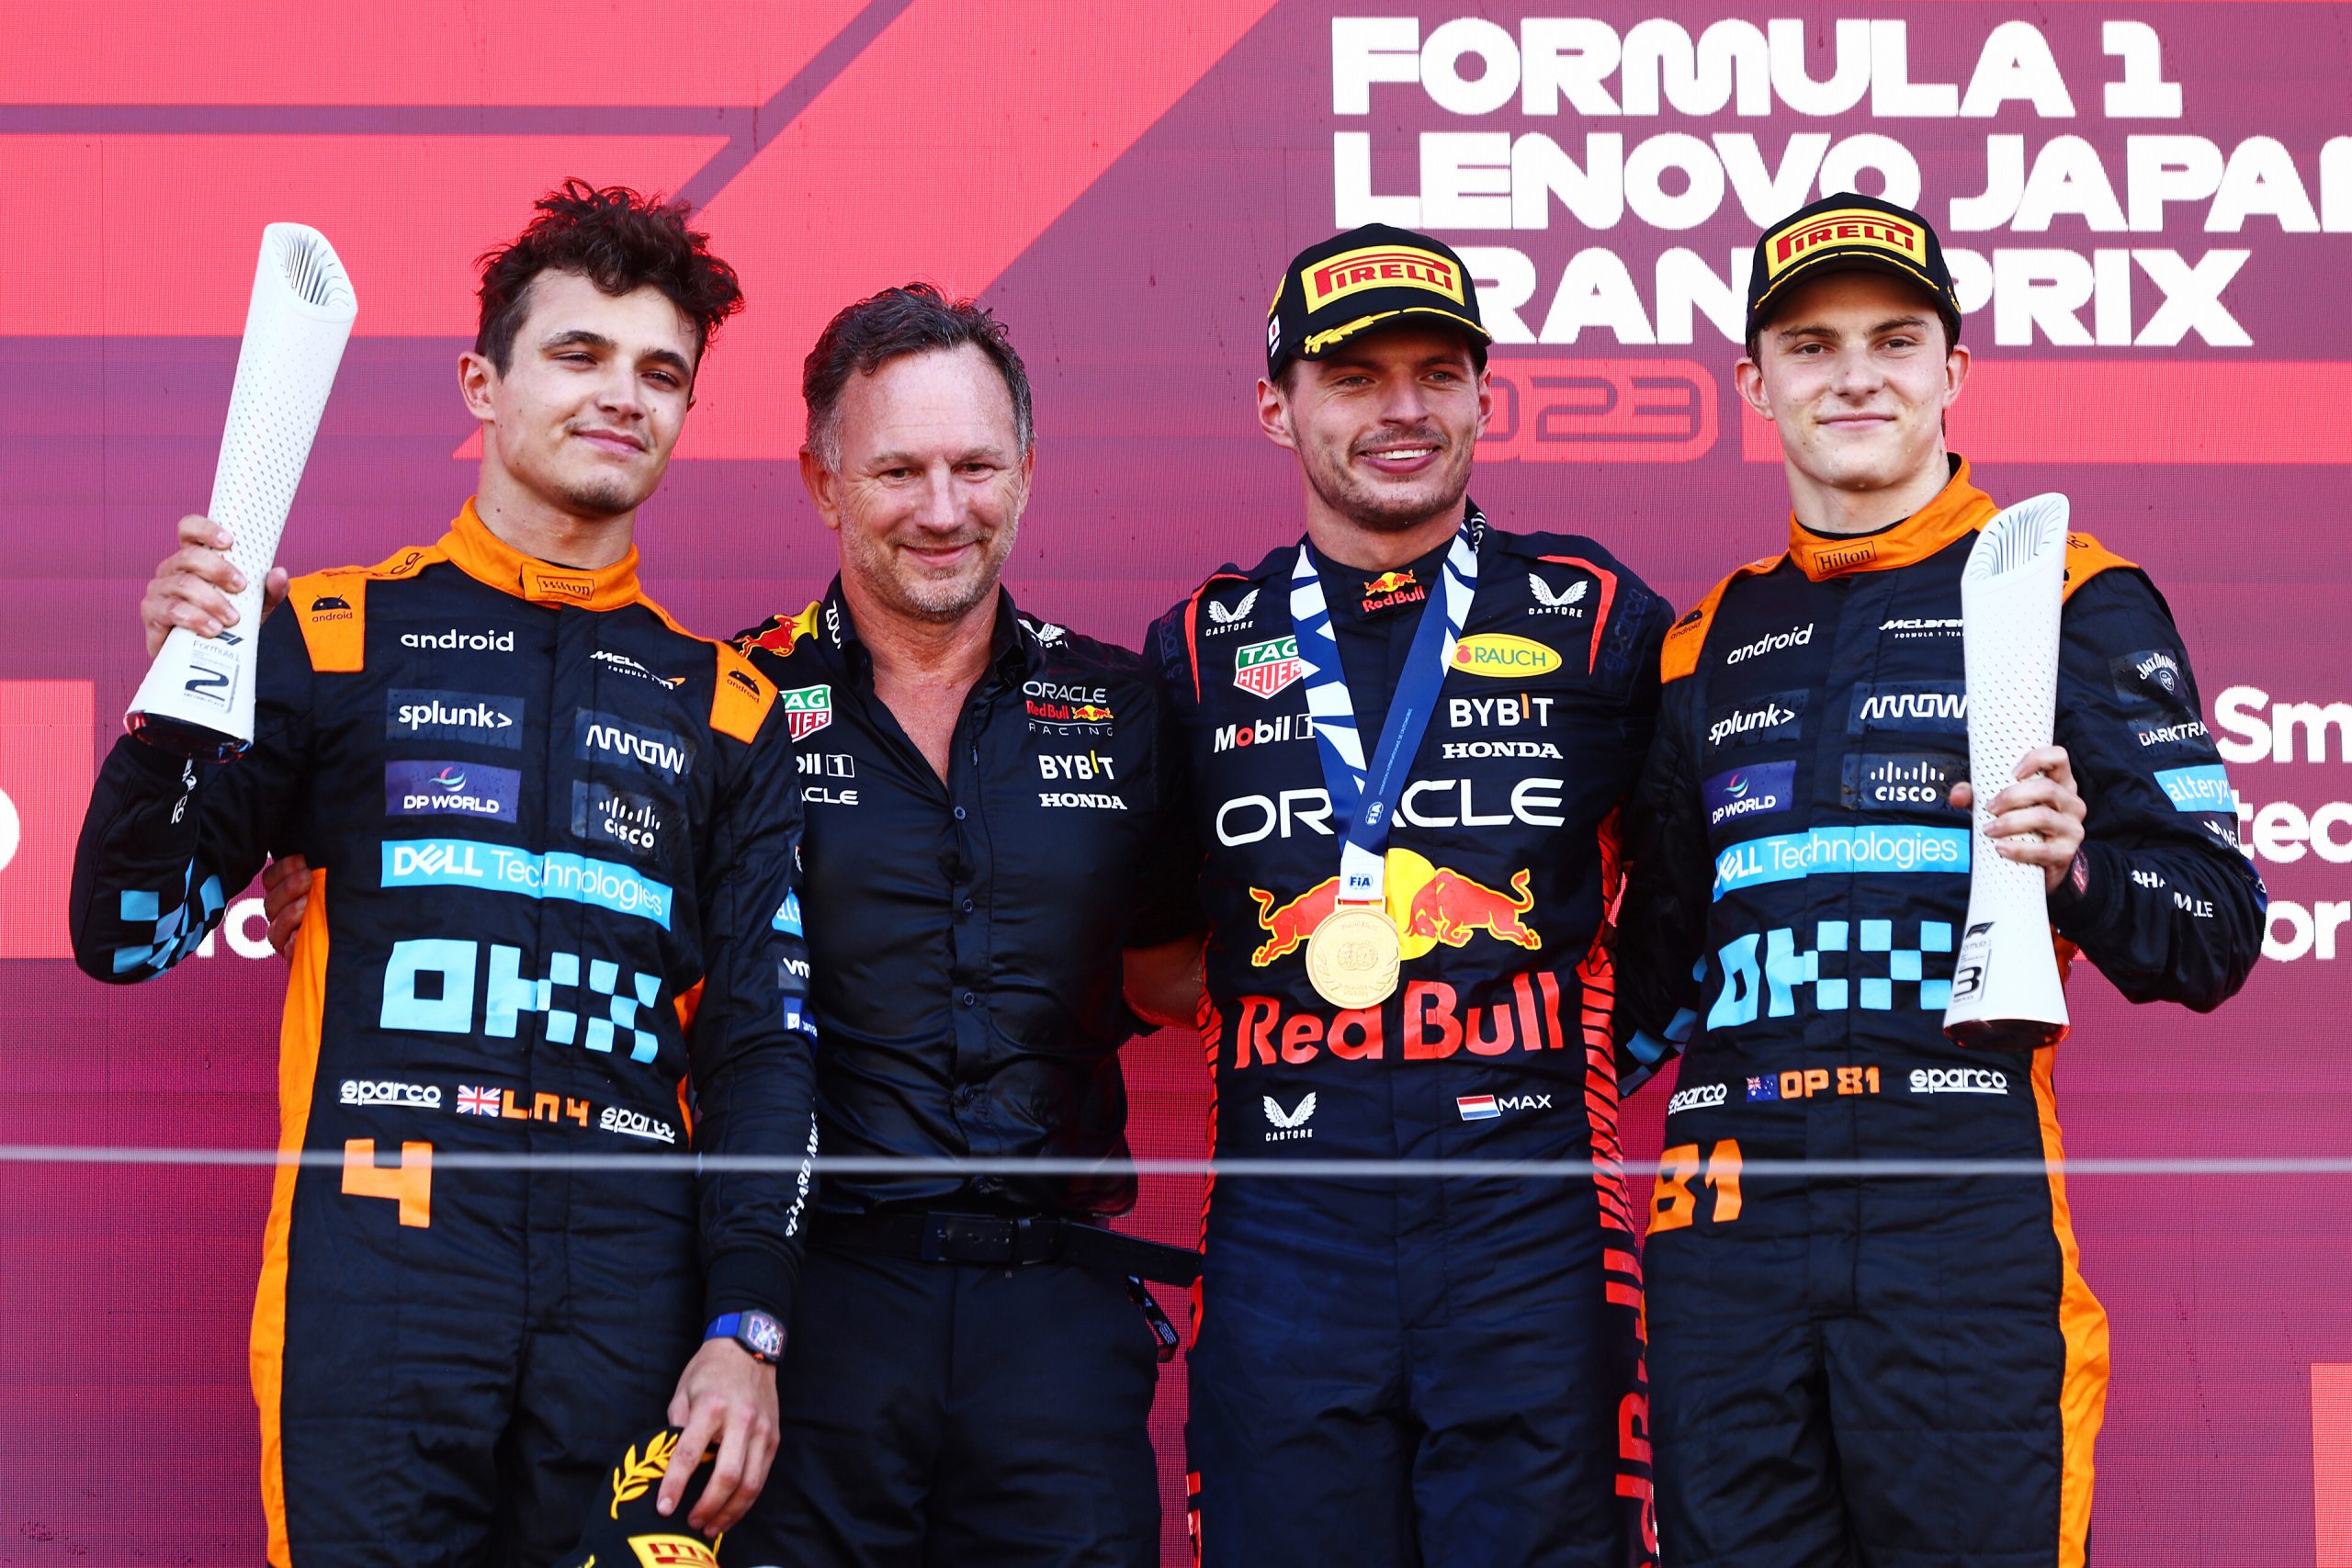 Lando Norris and Oscar Piastri of McLaren, on the podium with Max Verstappen and Christian Horner, Japanese Grand Prix 2023.